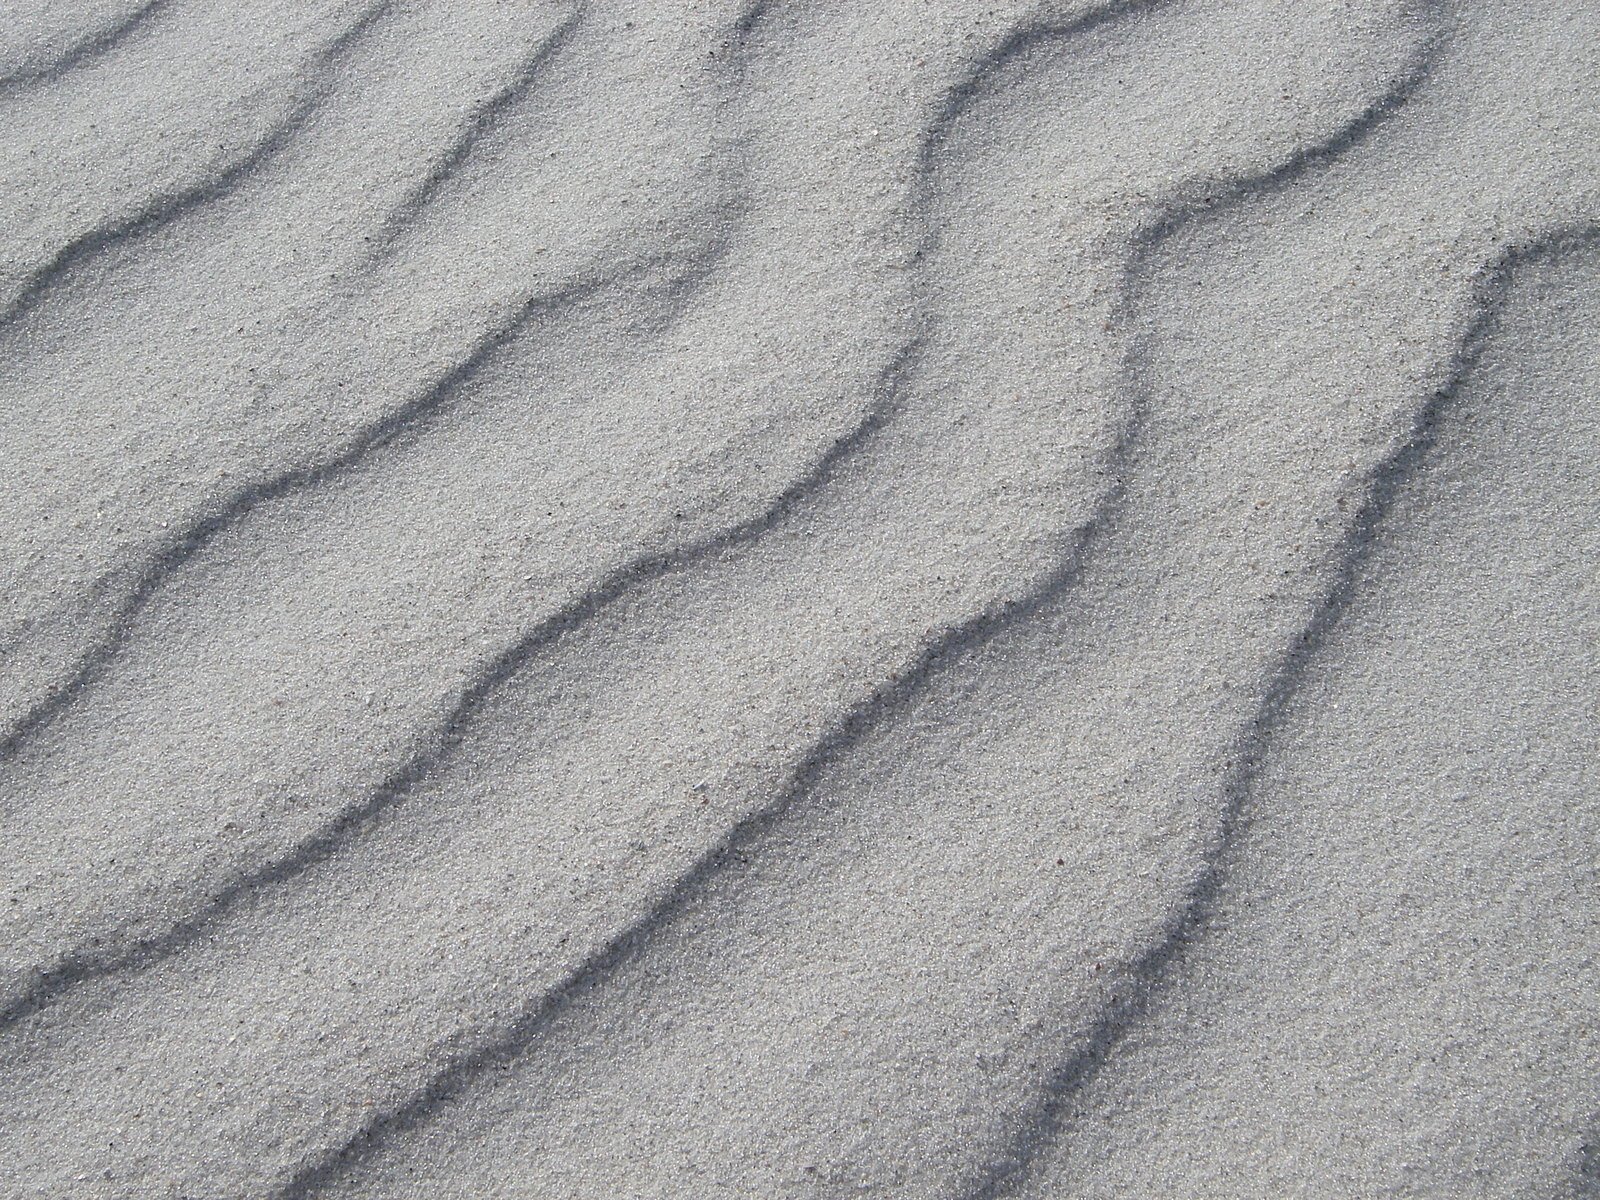 the sand has ridges on it as they move through the sand